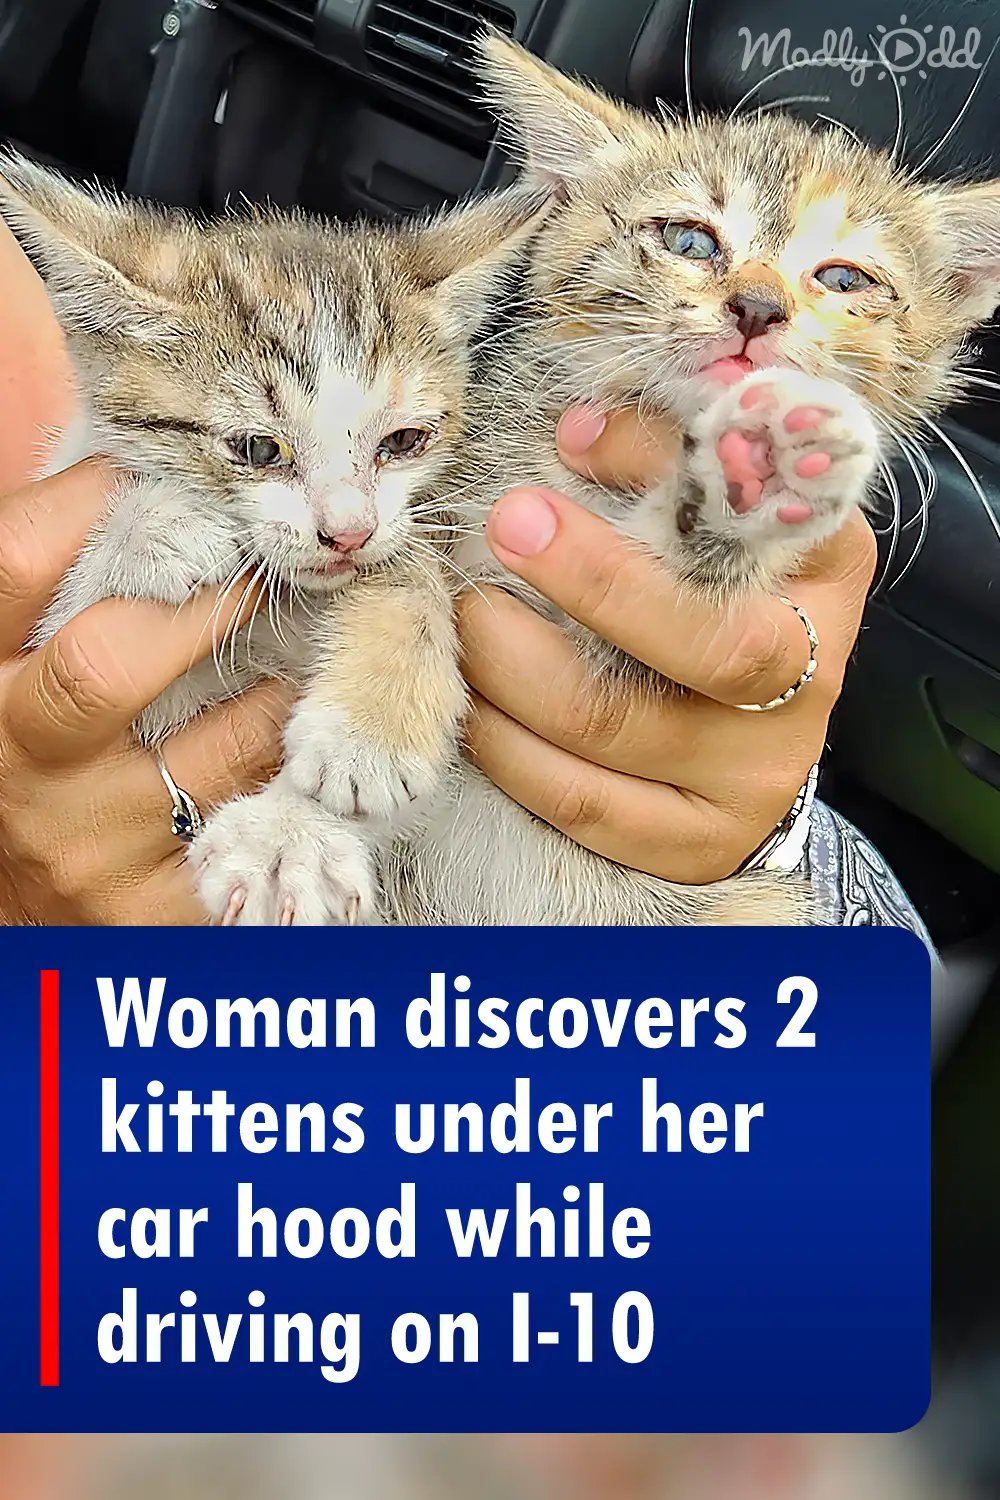 Woman discovers 2 kittens under her car hood while driving on I-10